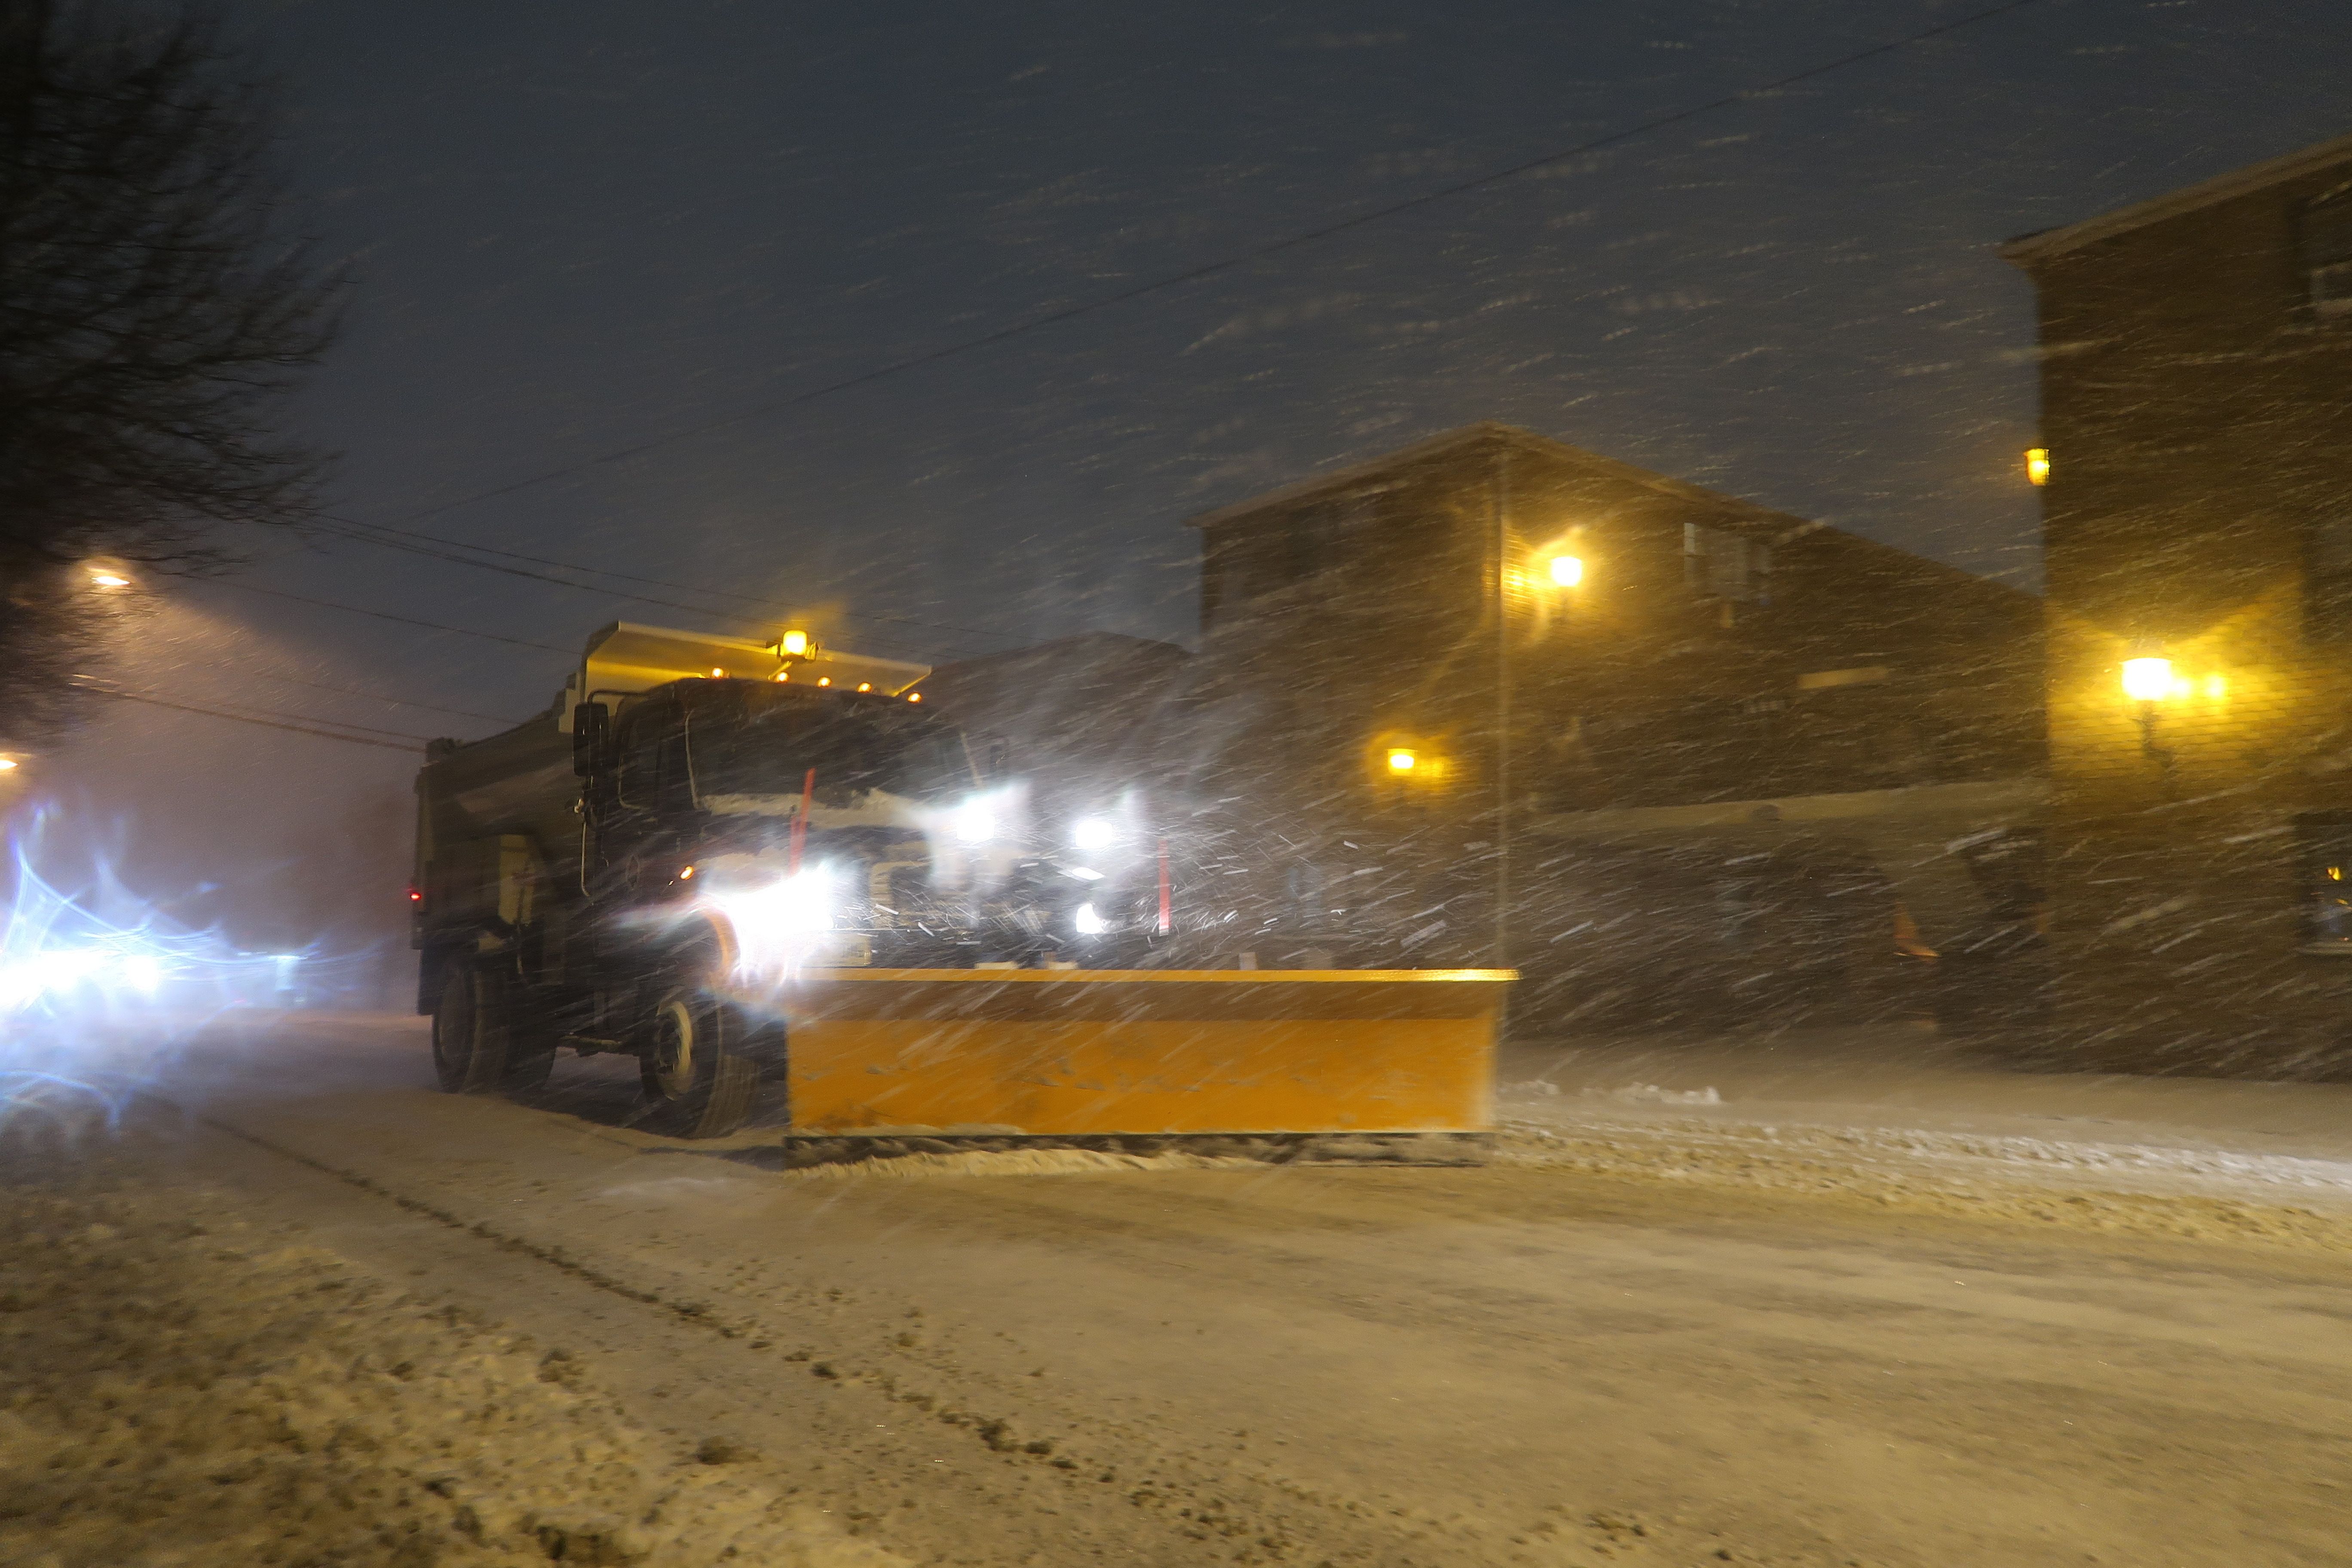  A snowplow clears snow as snow accumulates on December 16, 2020 at Cliffside Park, New Jersey